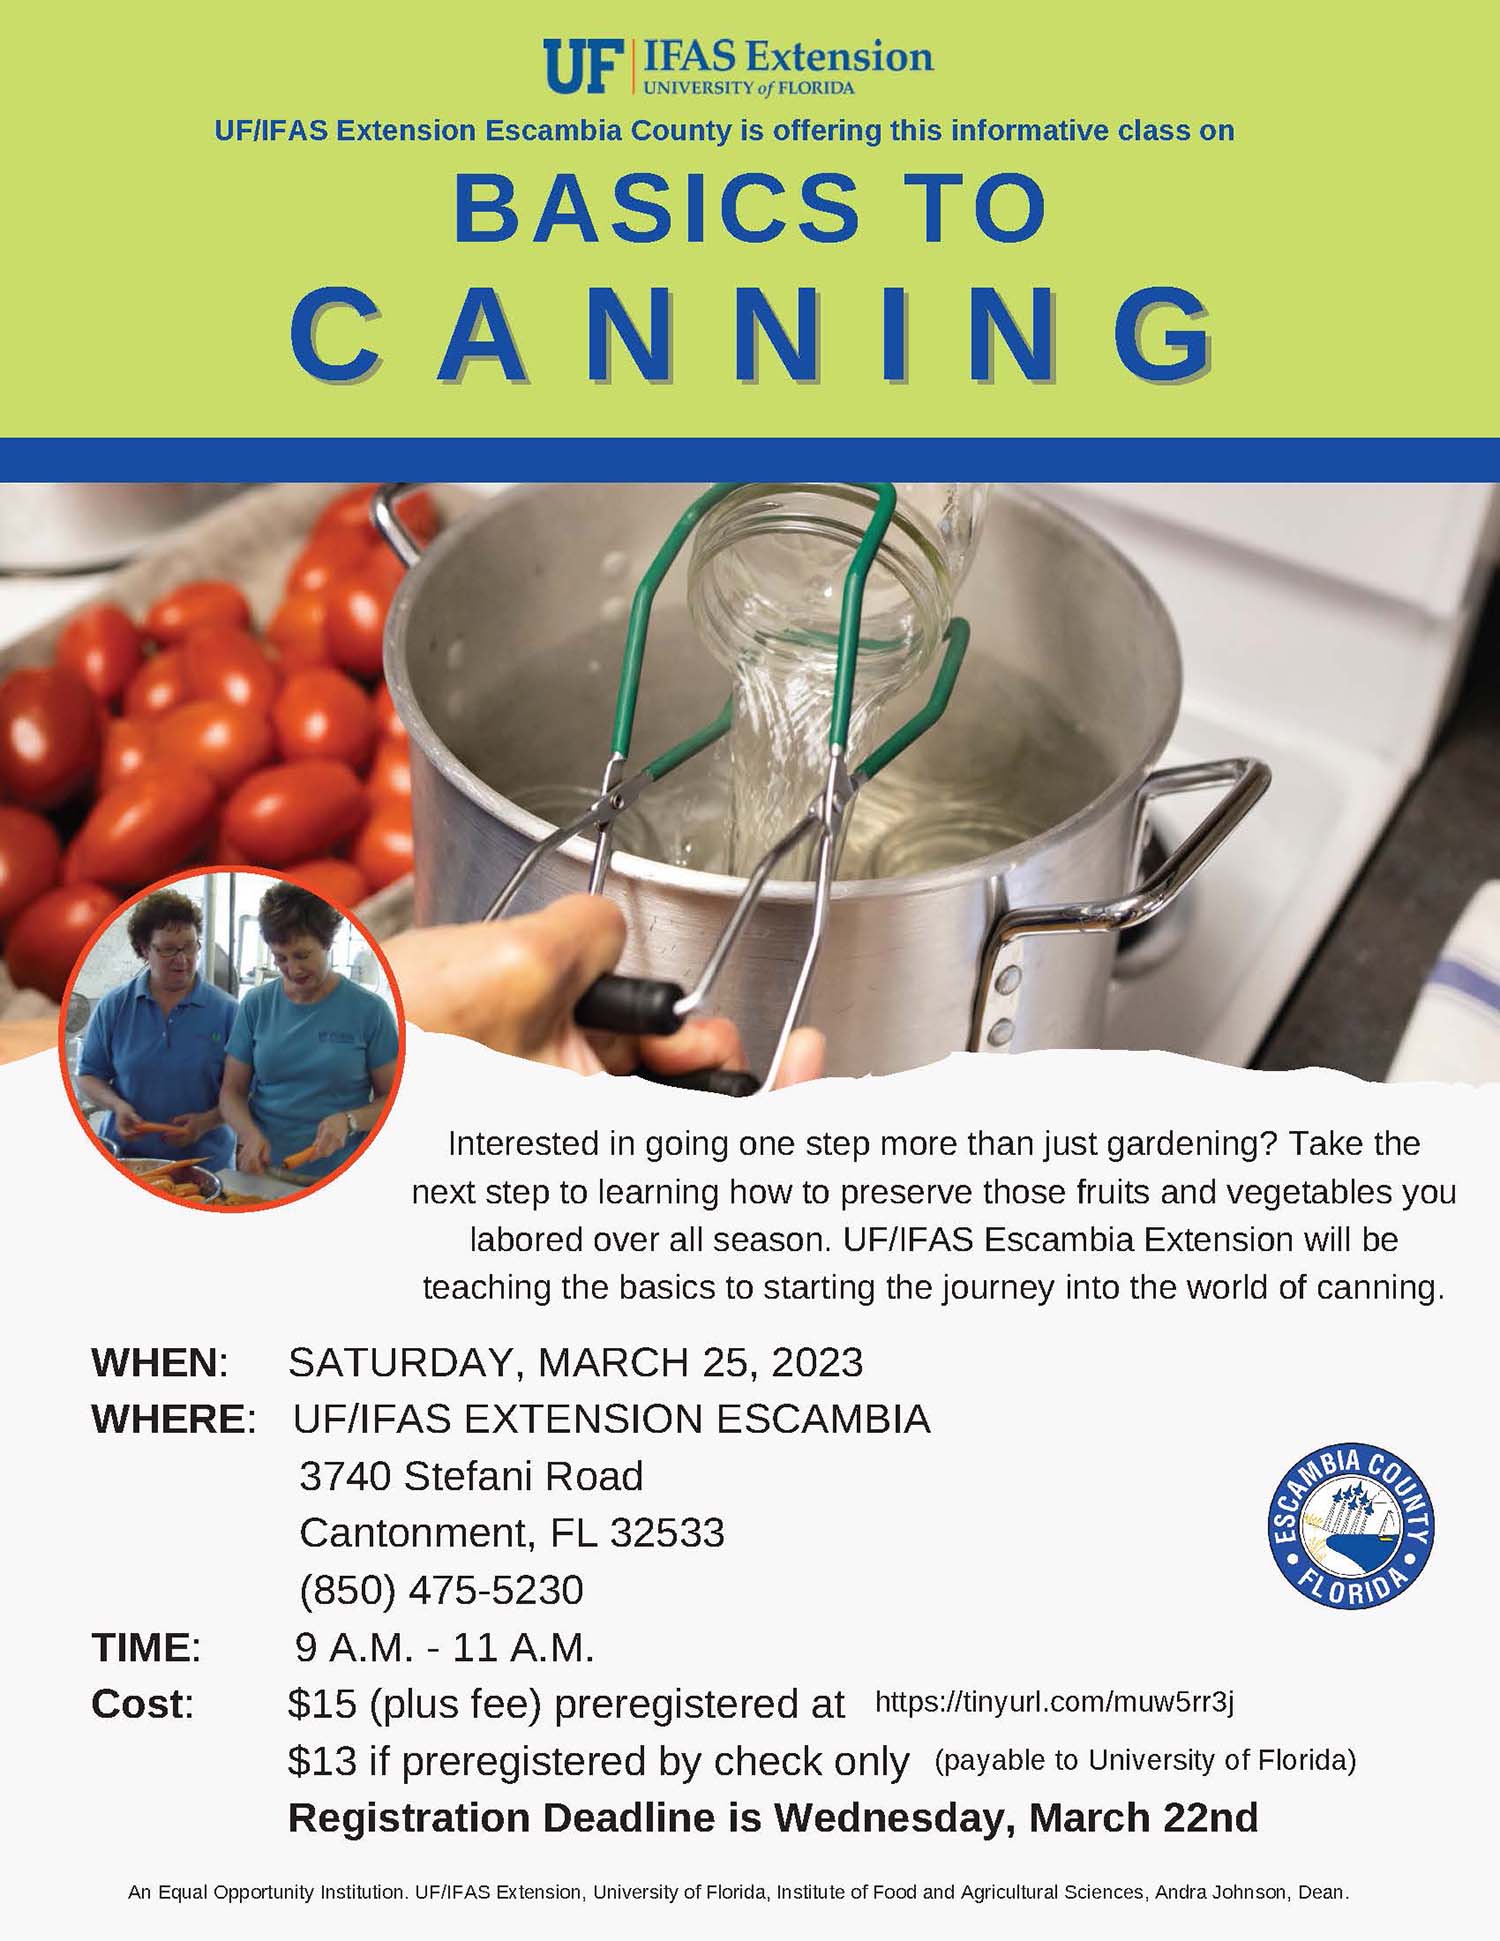 UF/IFAS Escambia Extension Canning Event Flyer